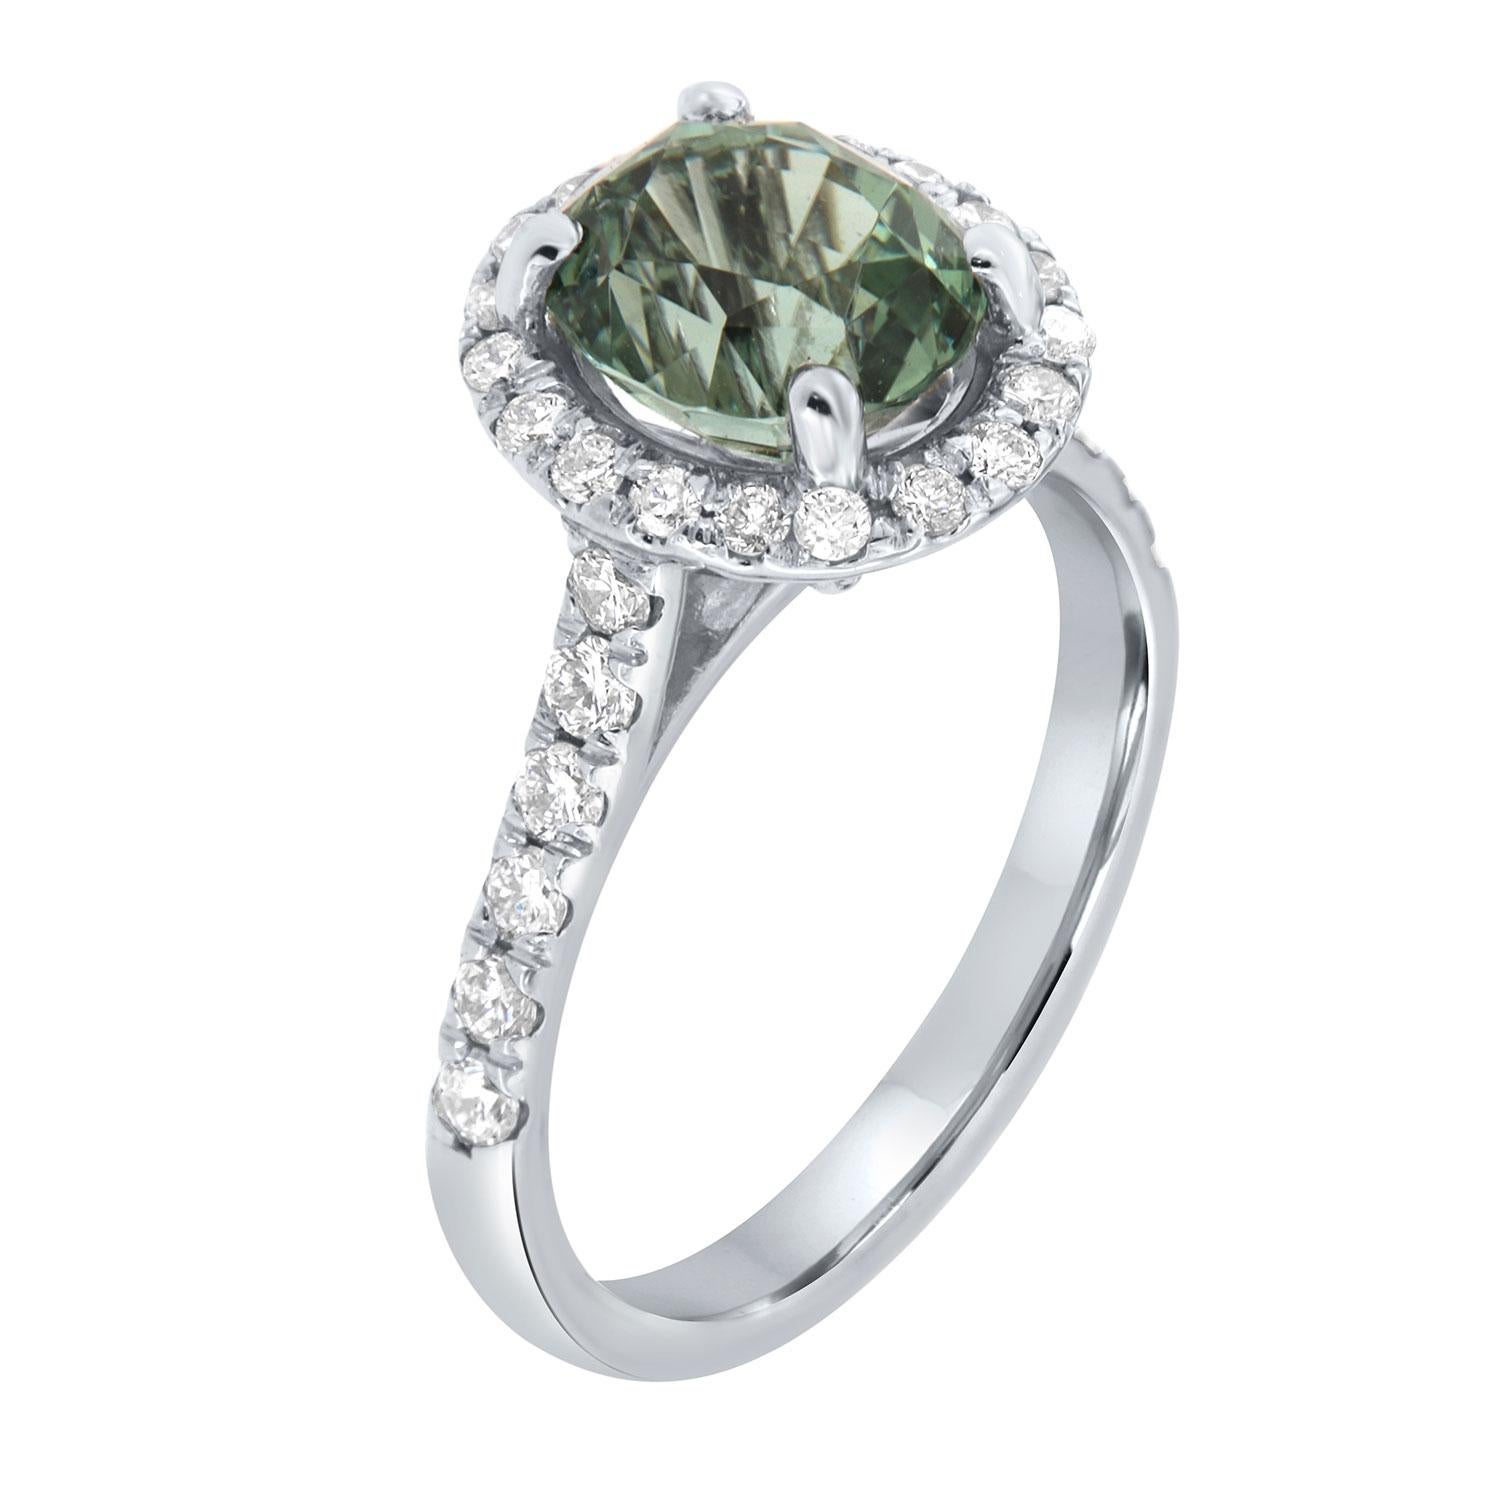 This ring features an oval-shaped light, vibrant green color 2.47-carat Tourmaline encircled by nineteen (19) or brilliant round diamonds Micro-Prong -Set. Twelve (12) 2mm size brilliant diamonds are micro-prong set on top of a 2.3 mm wide band. The